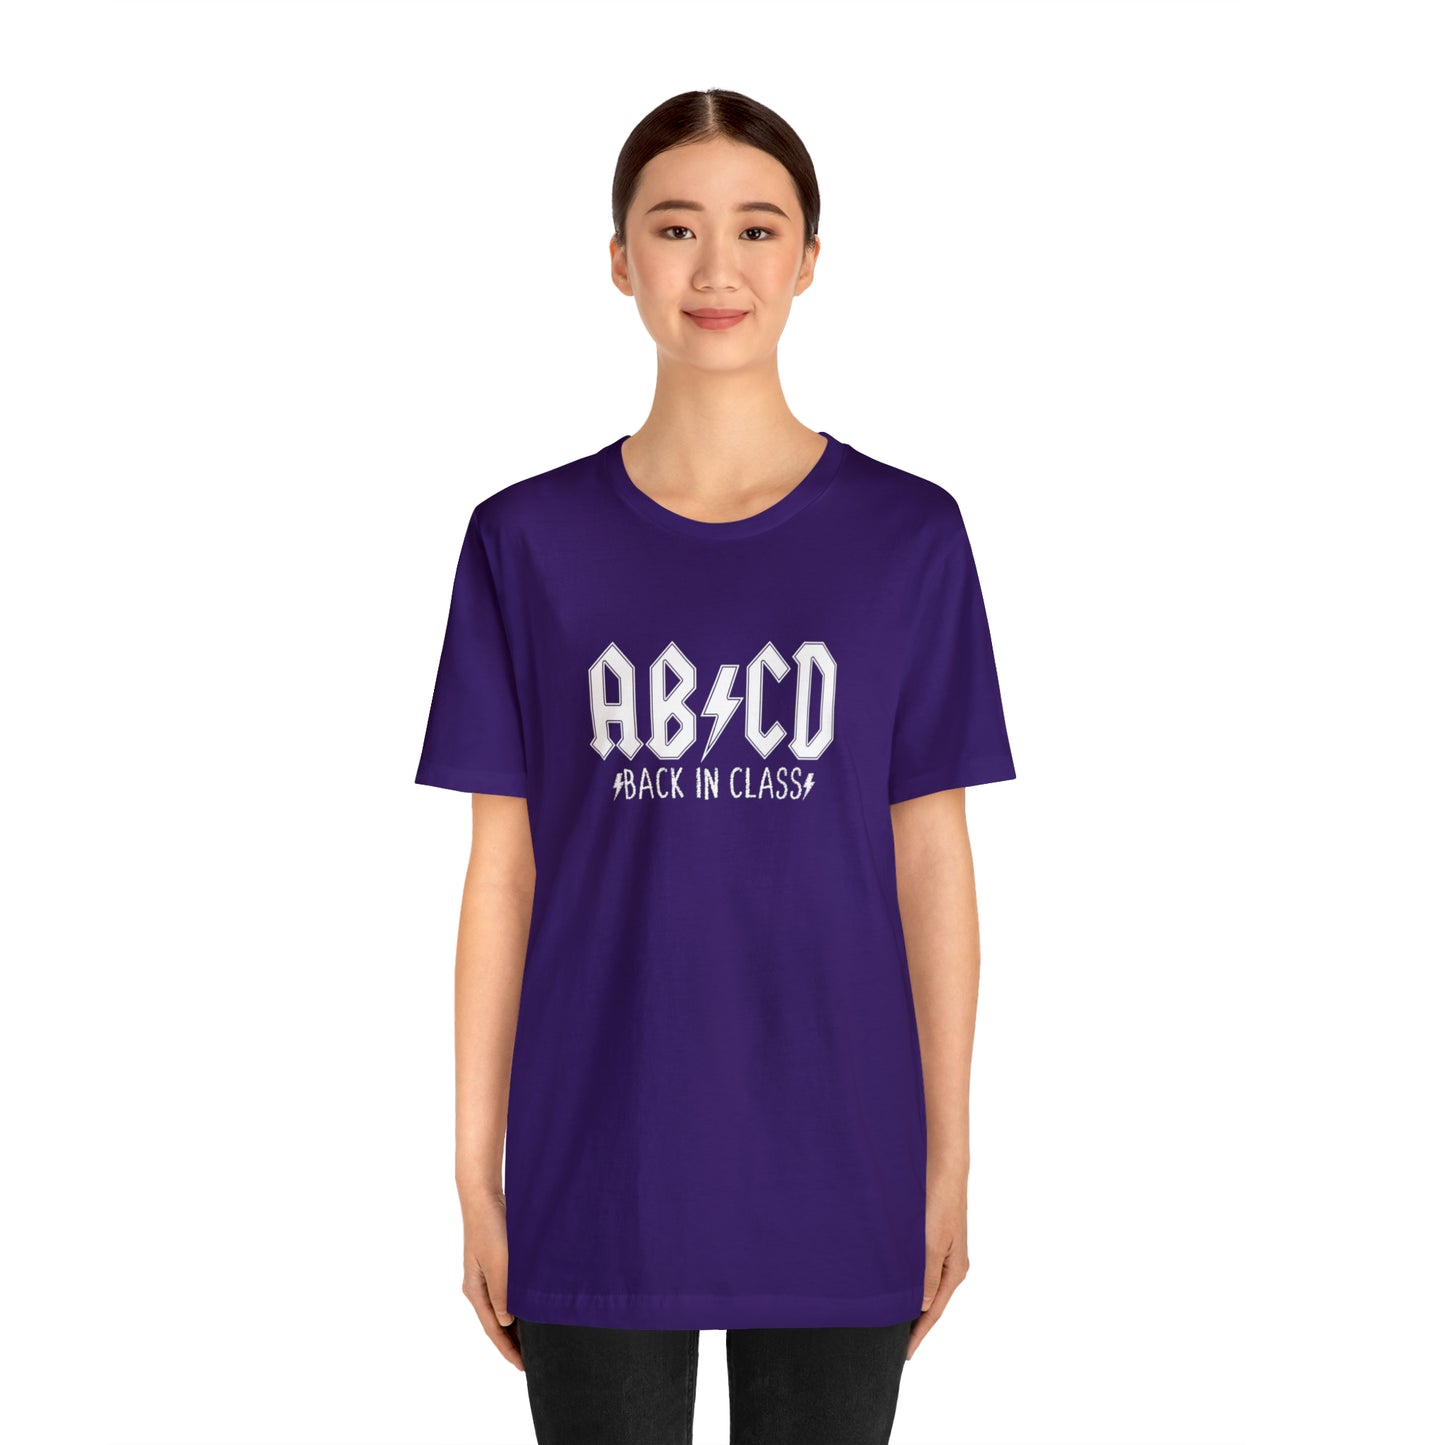 AB/CD Back in Class Unisex Jersey Short Sleeve Tee